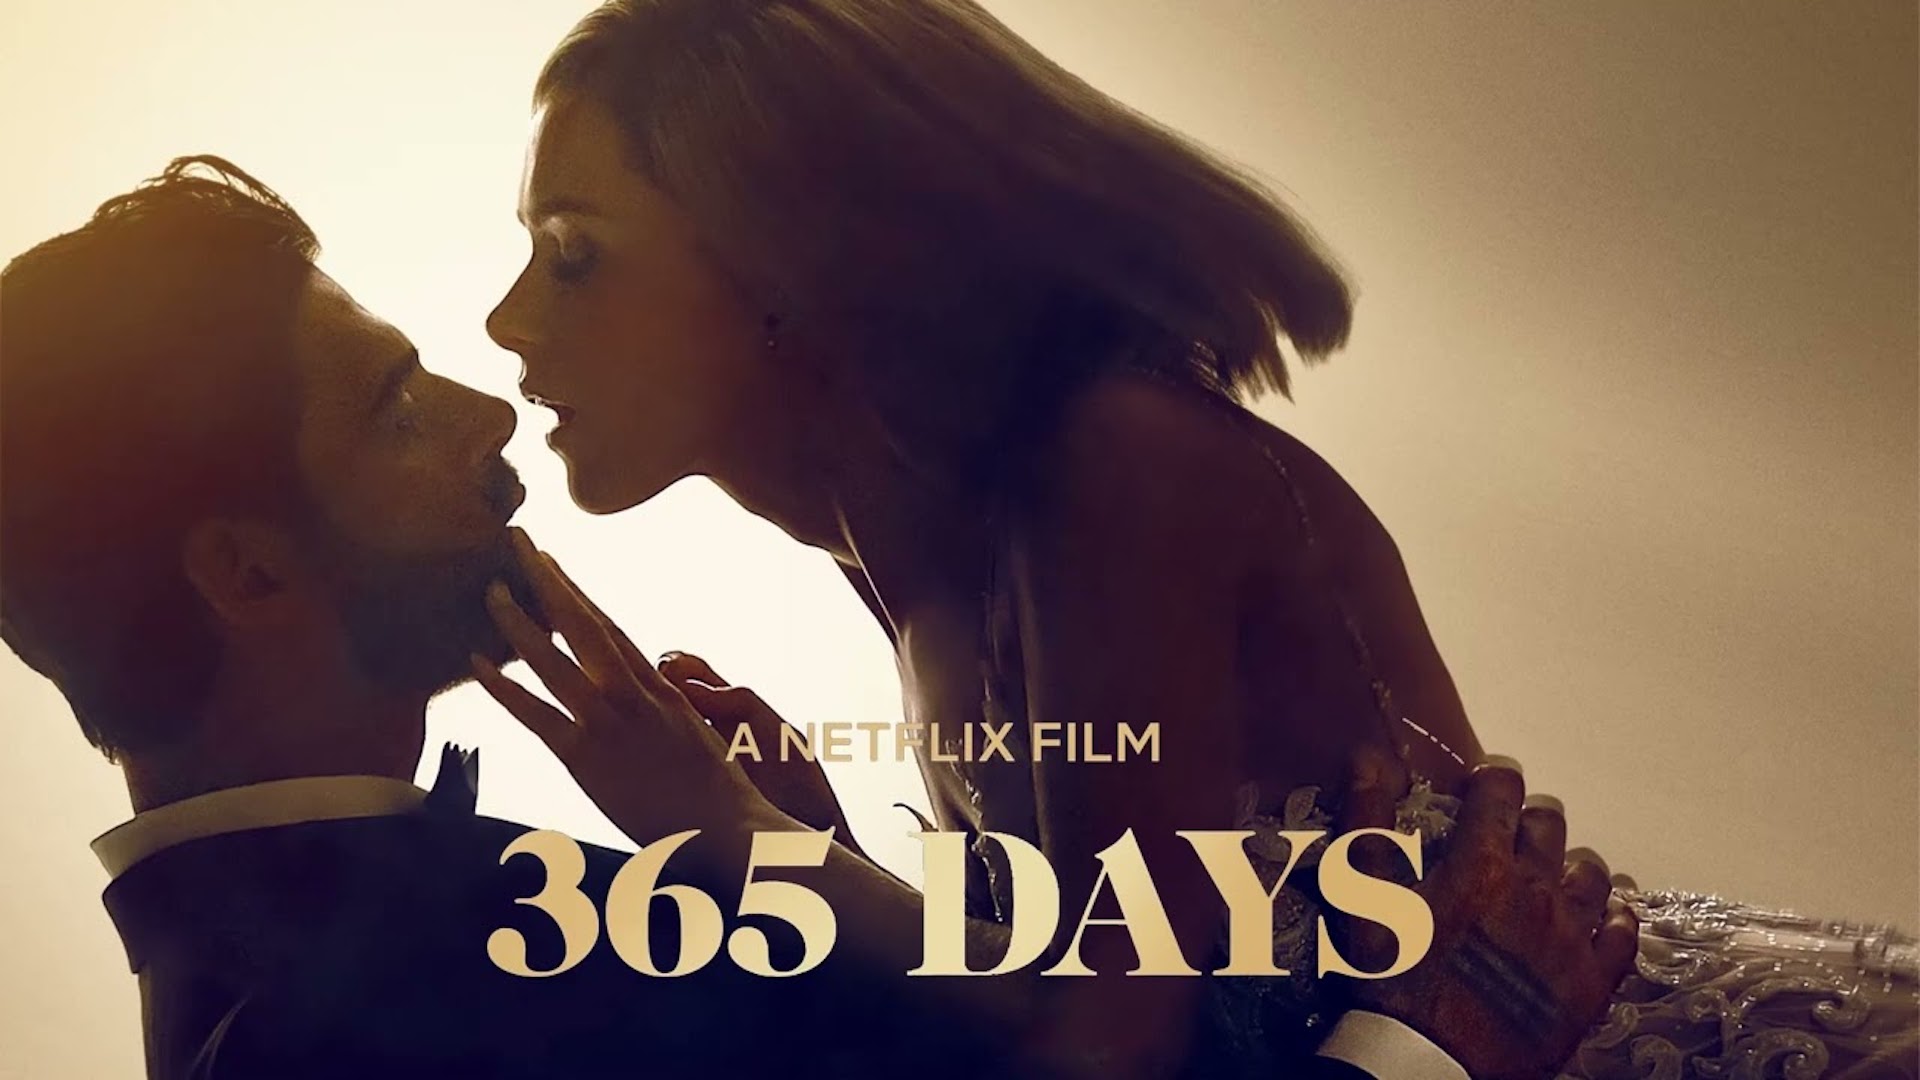 (123movies) Watch ‘365 Days This Day’ Free online streaming At home